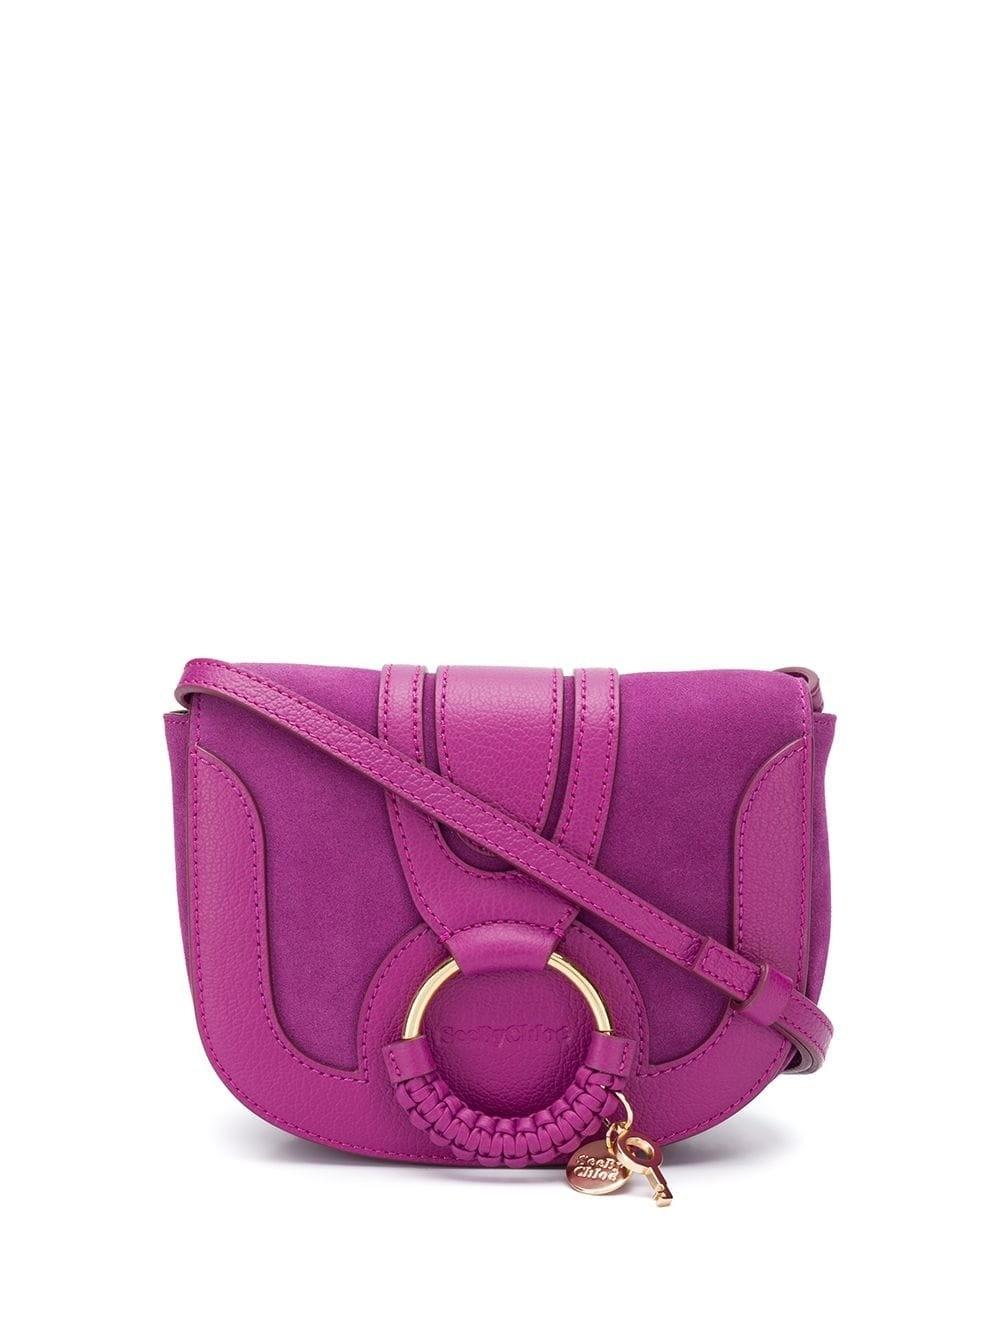 See By Chloé Hana Mini Leather Shoulder Bag in Purple - Lyst